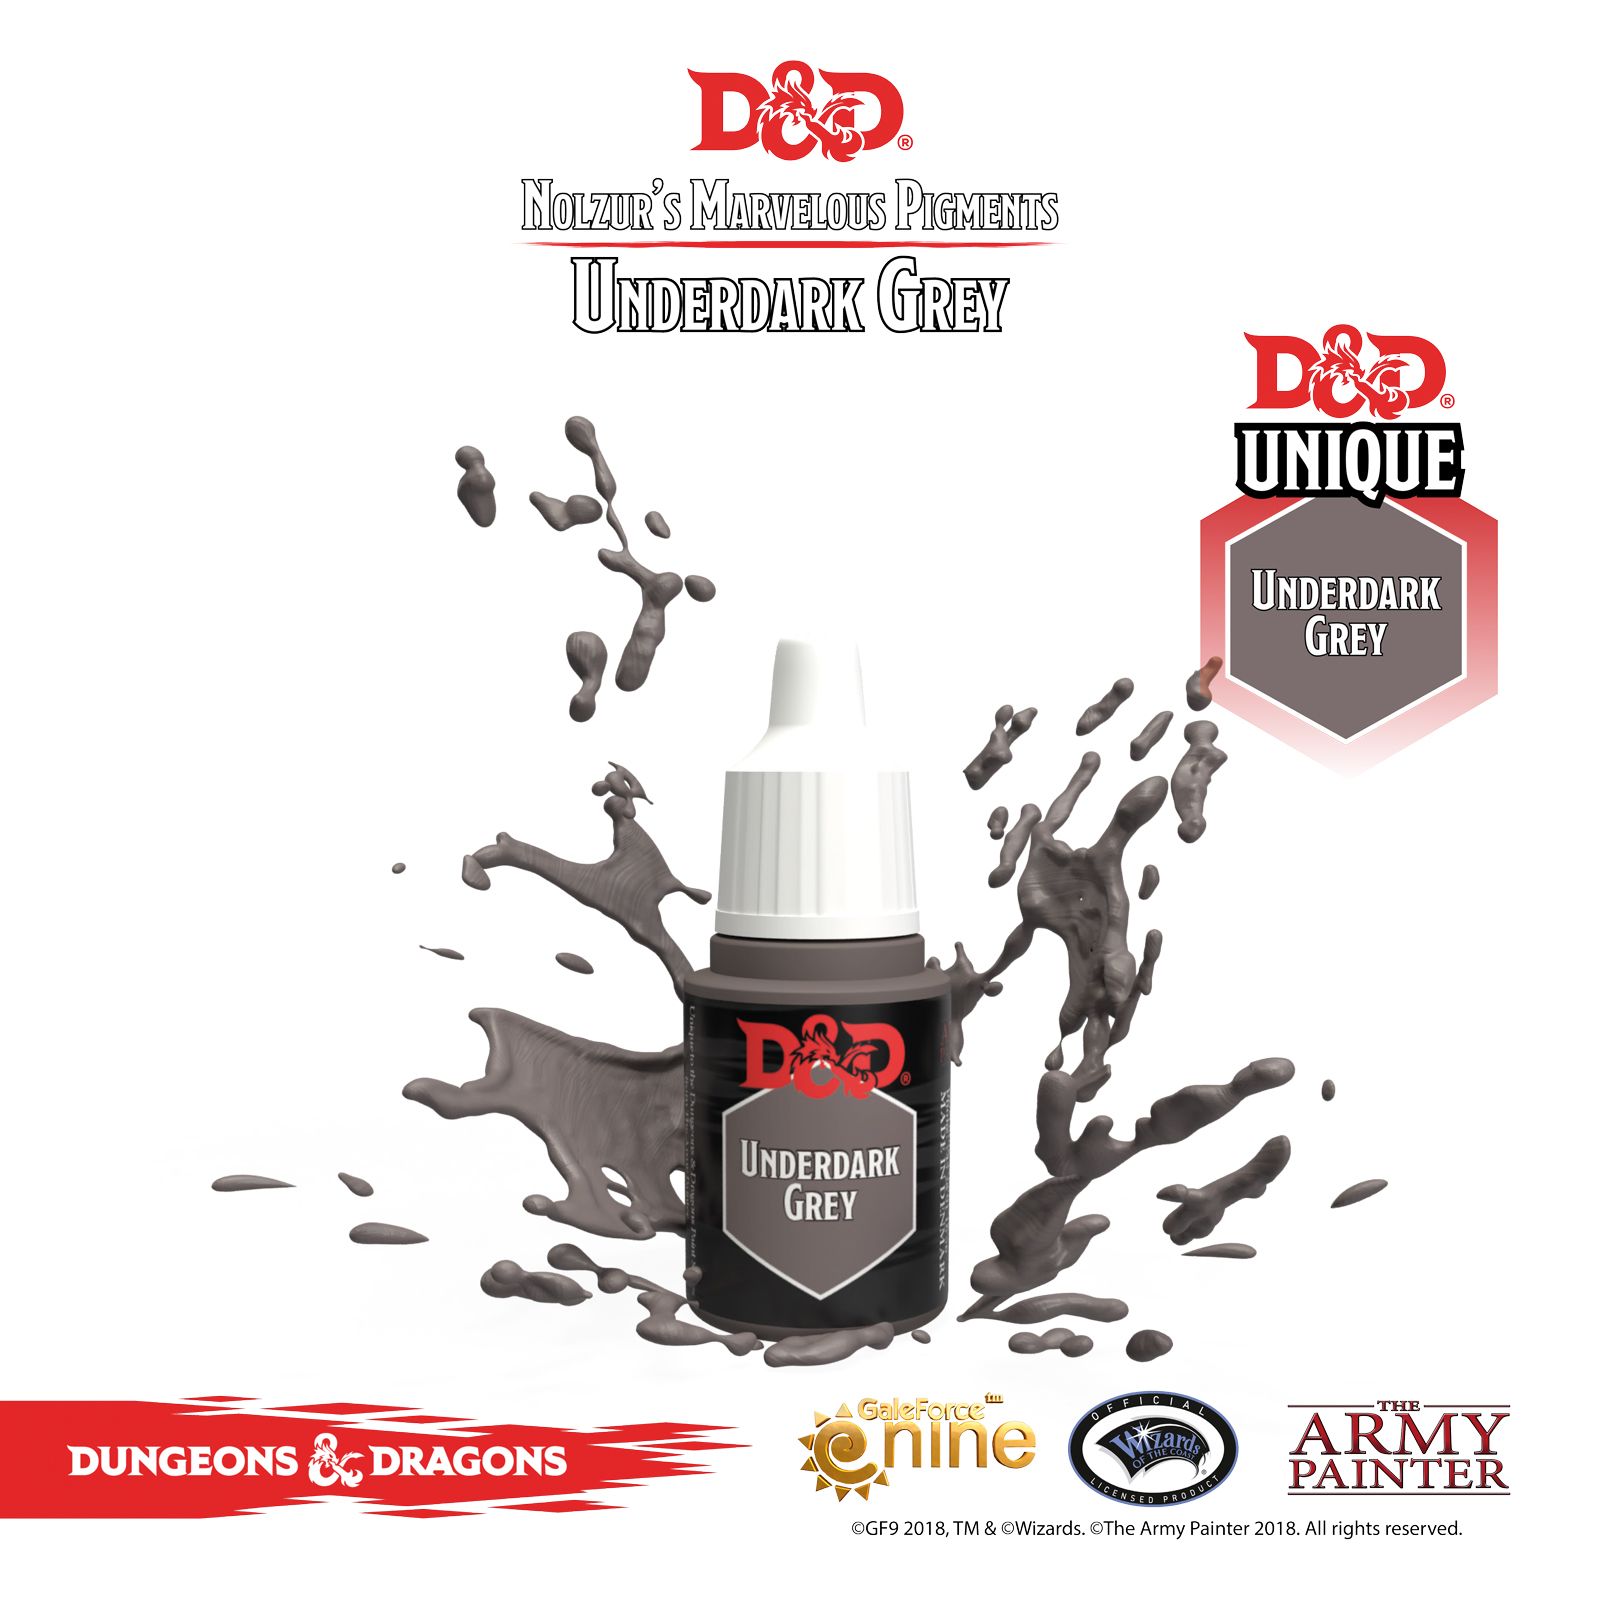 Find The official D&D paint, brushes & sets here